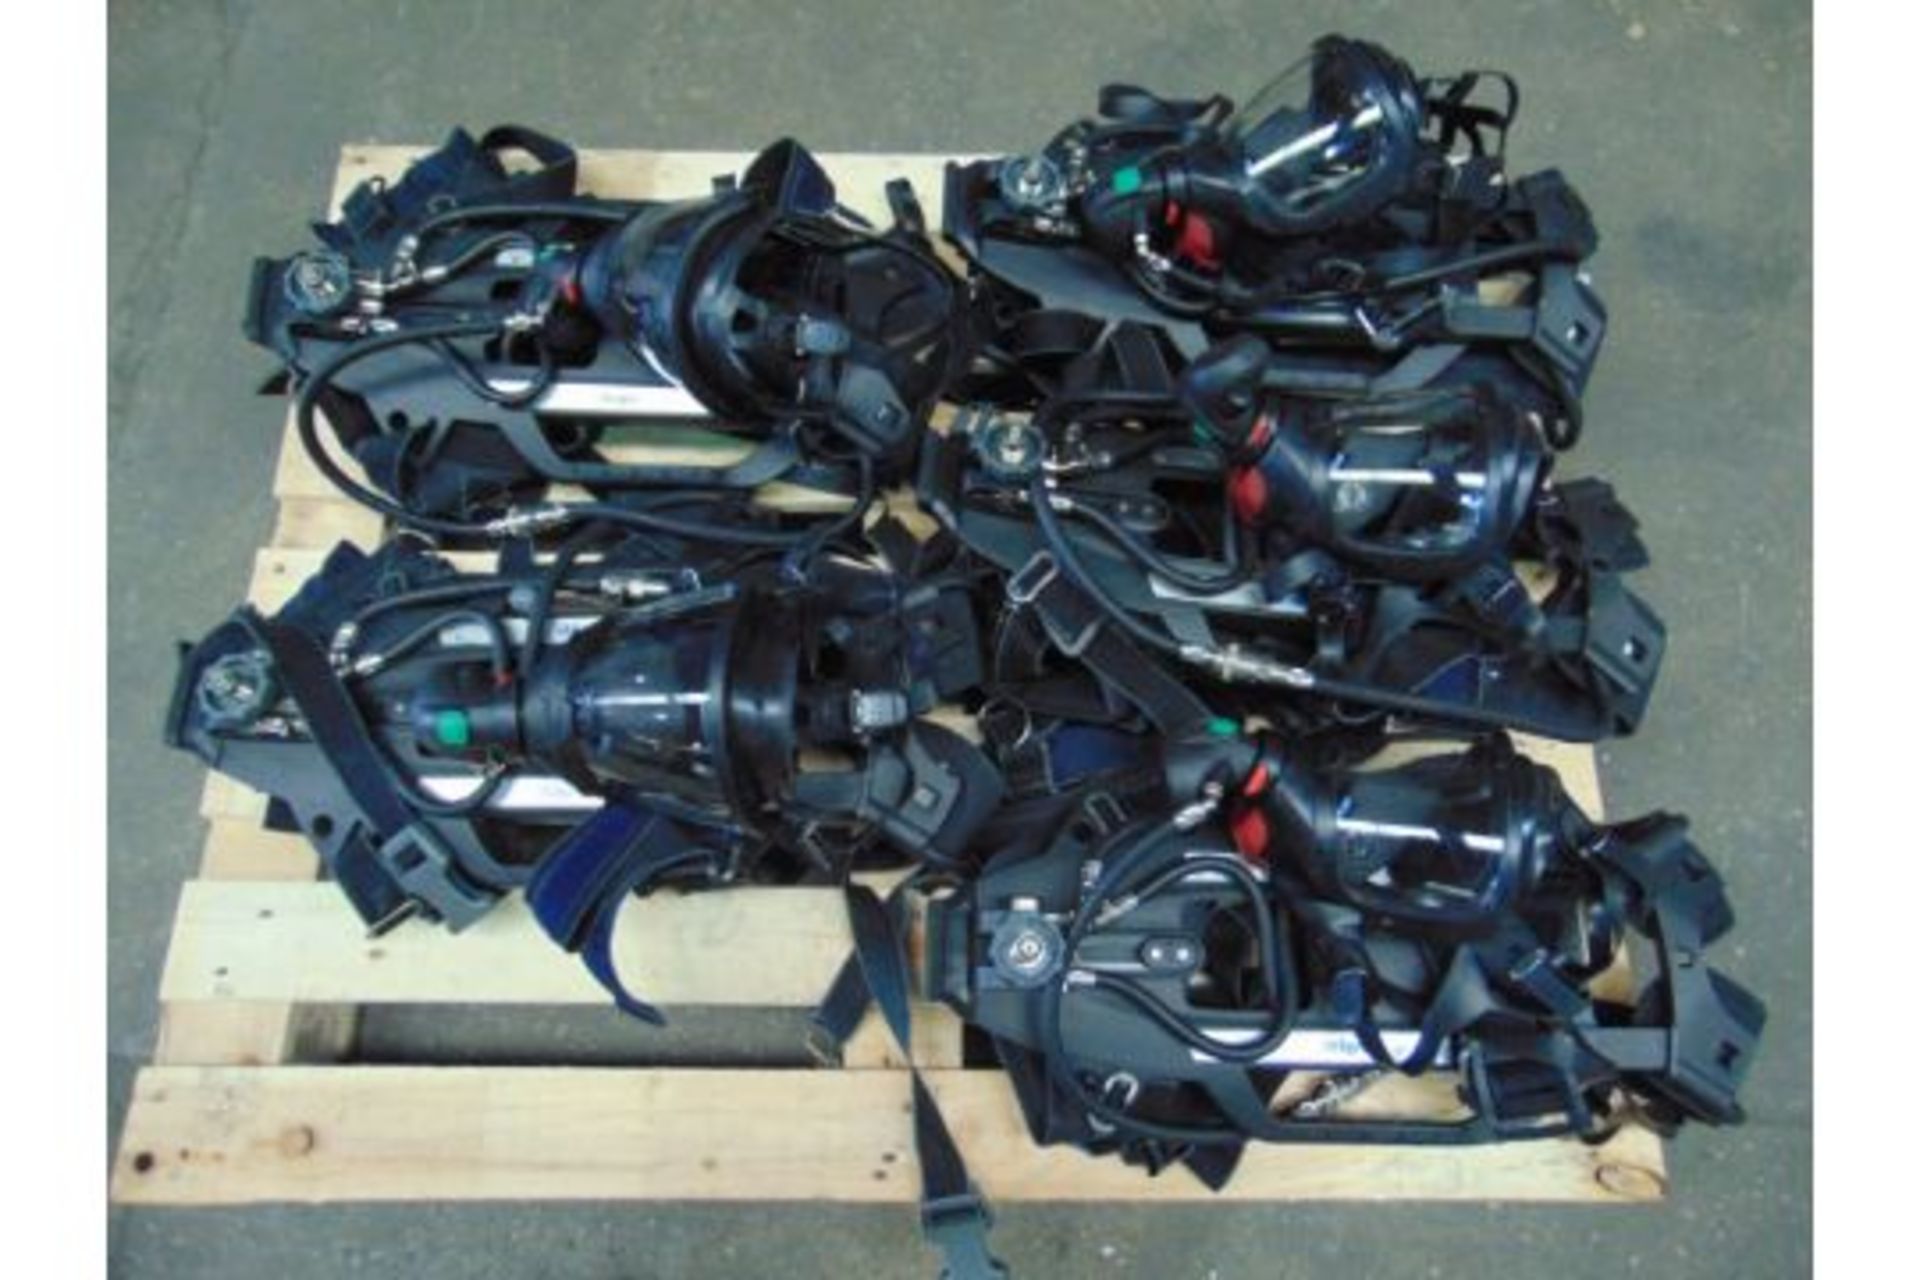 5 x Drager PSS 7000 Self Contained Breathing Apparatus w/ 10 x Drager 300 Bar Air Cylinders - Image 12 of 28